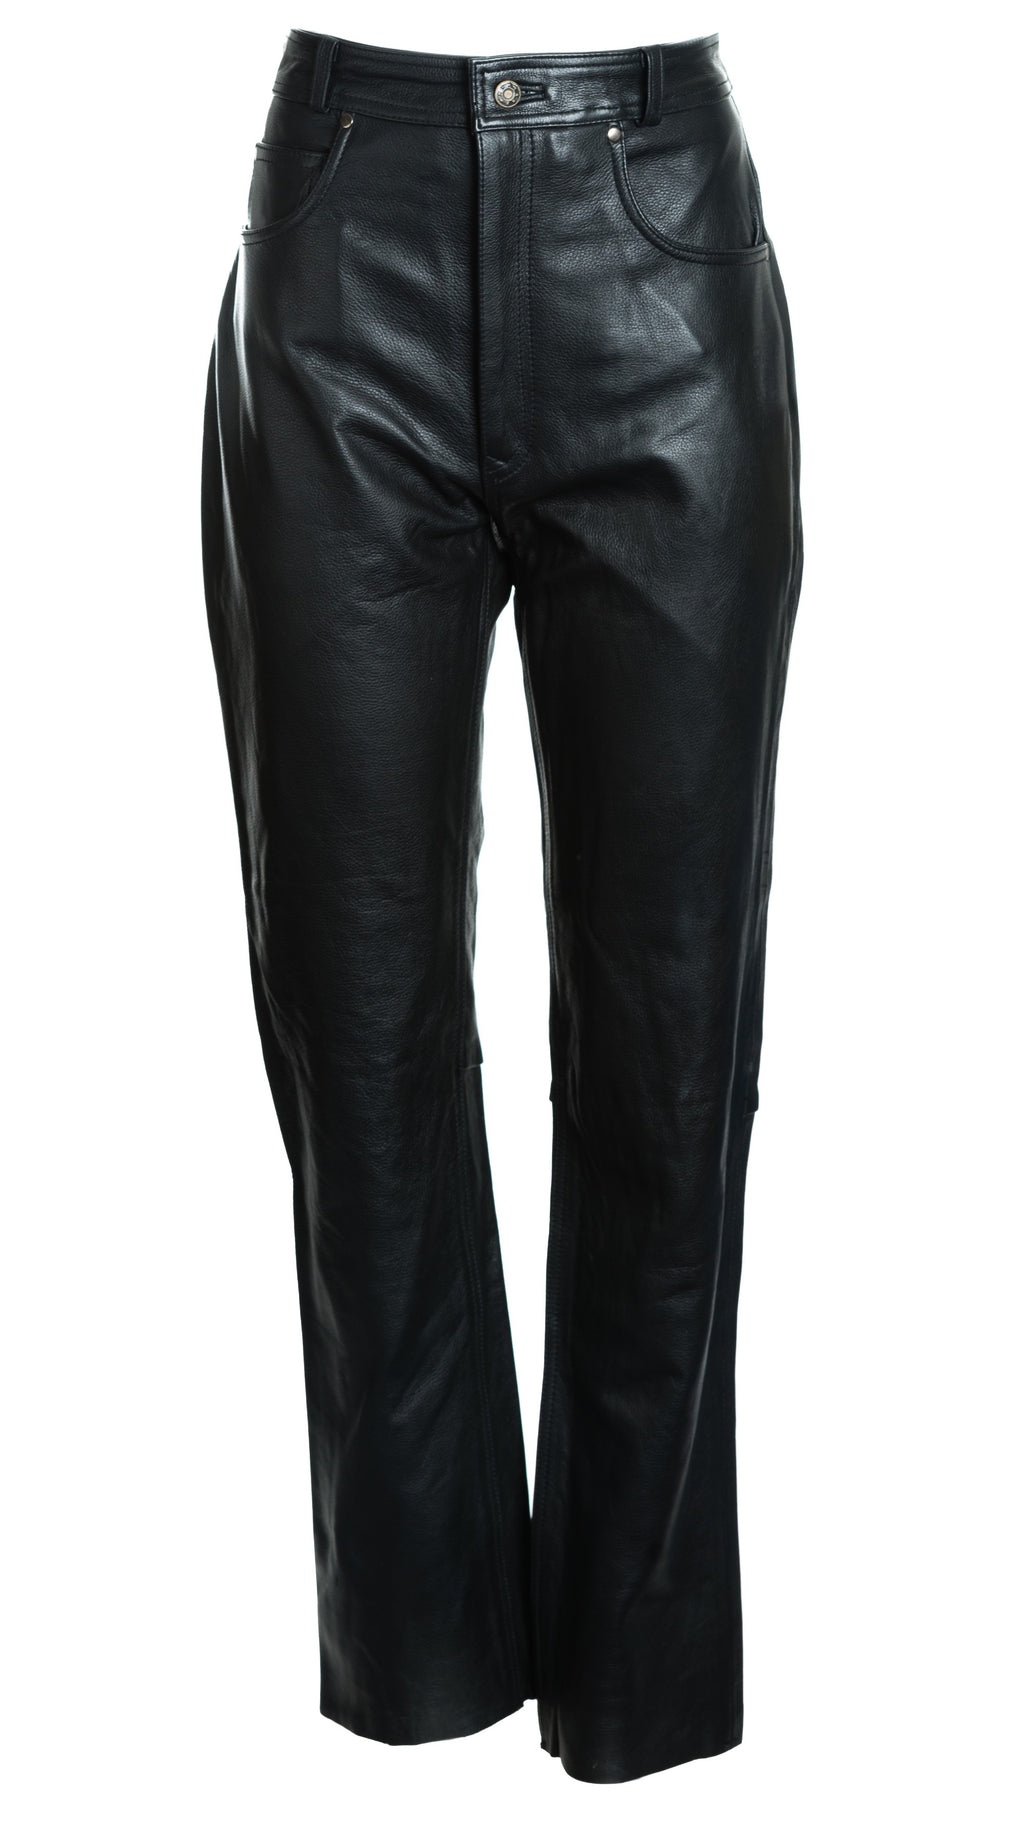 Mens Cow Hide Leather Jeans Style Trousers